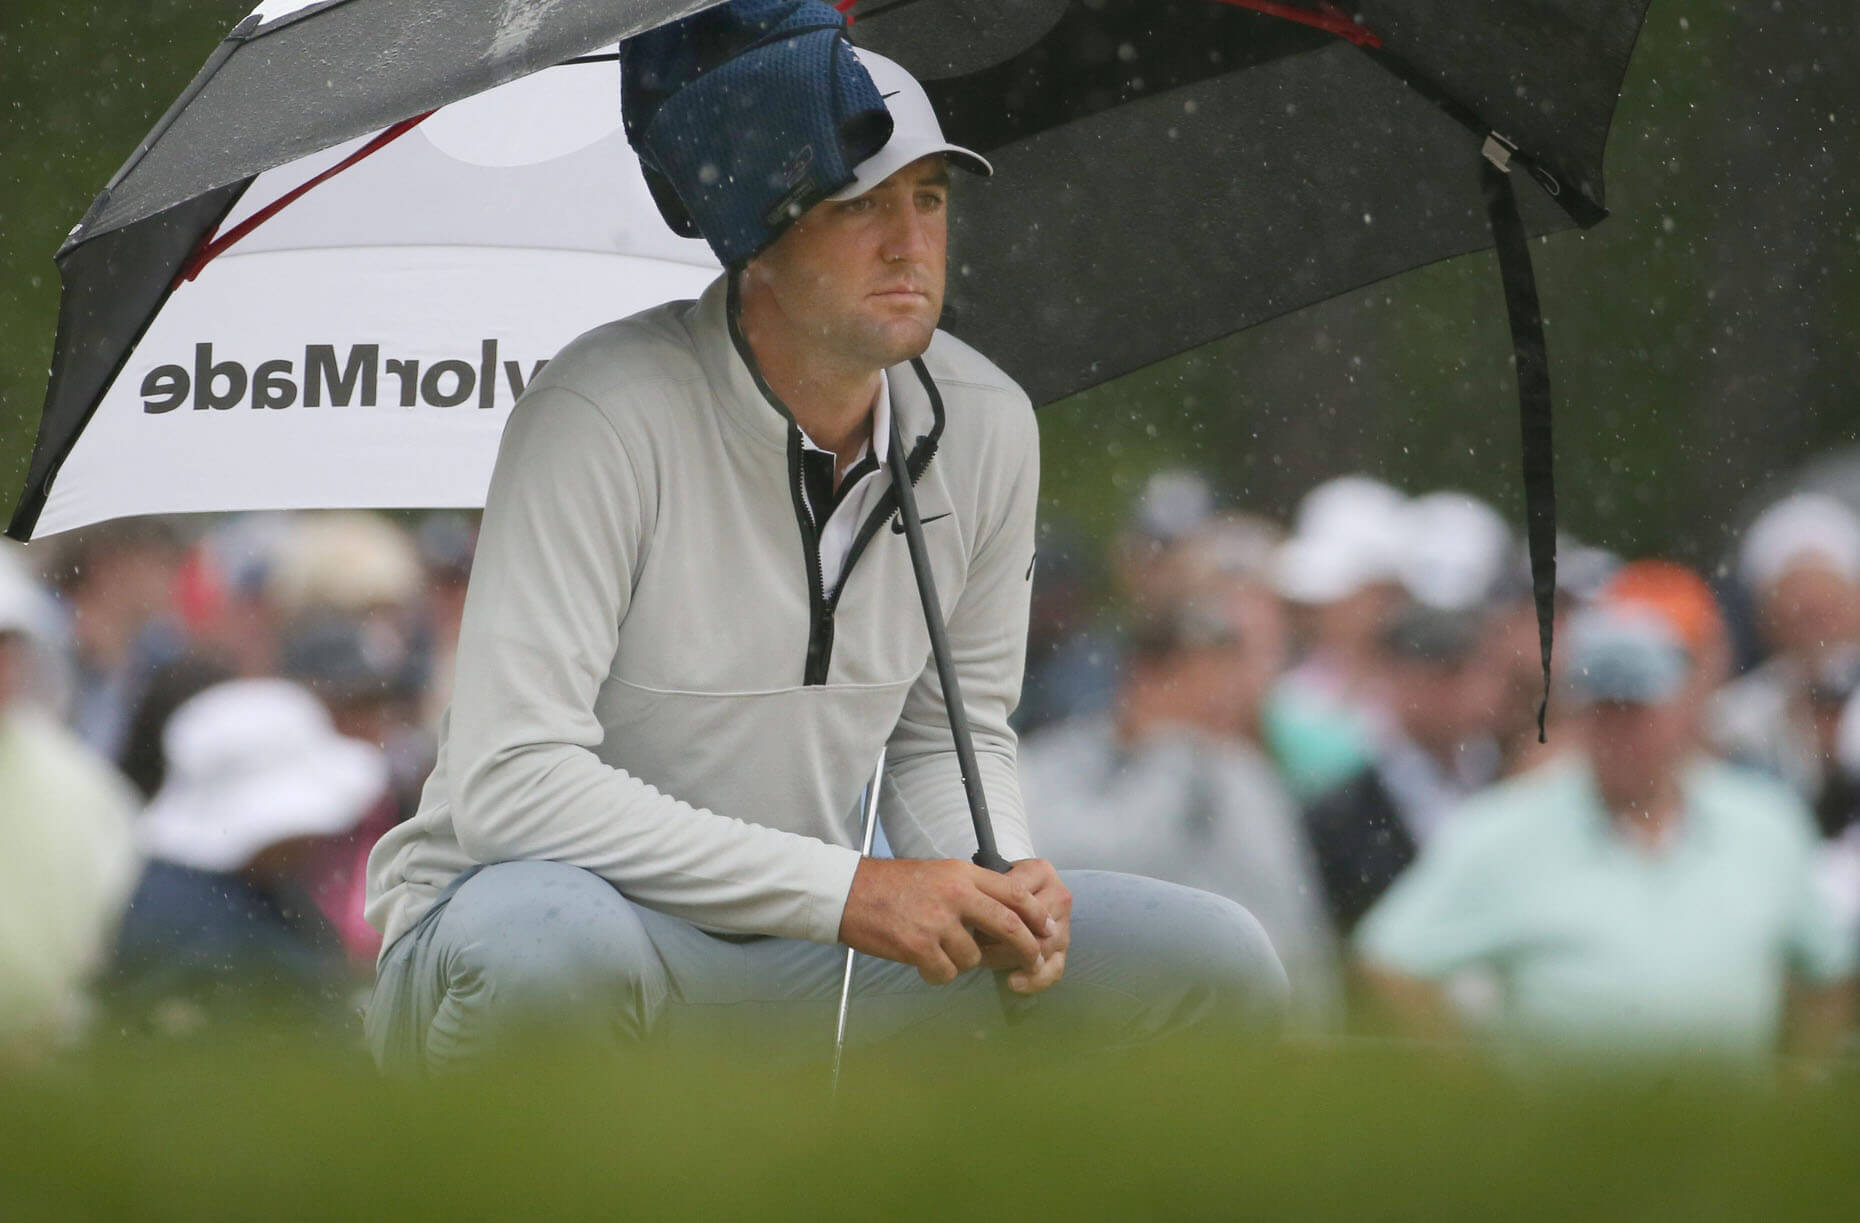 Scottie Scheffler looks over his par putt on the 9th hole as the rain comes down during the second round at last year's PGA Championship.